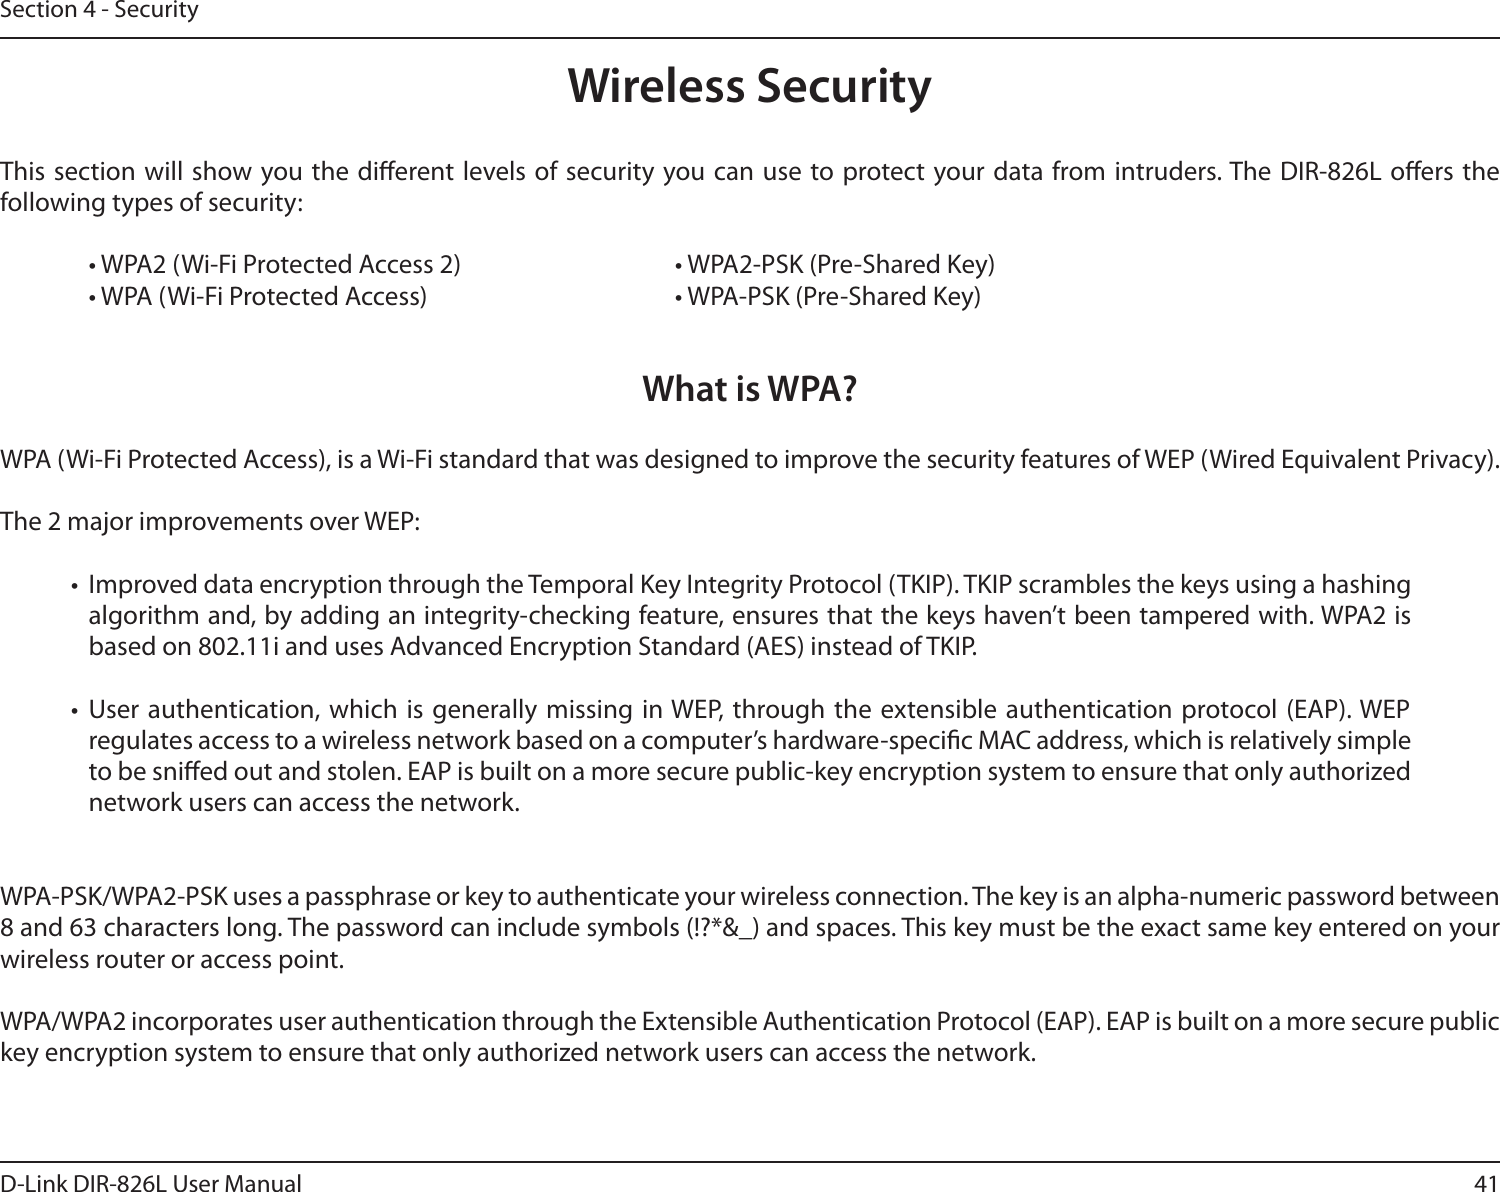 41D-Link DIR-826L User ManualSection 4 - SecurityWireless SecurityThis section will show you the dierent levels of security you can use to protect your data from intruders. The DIR-826L oers the following types of security:  • WPA2 (Wi-Fi Protected Access 2)       • WPA2-PSK (Pre-Shared Key)  • WPA (Wi-Fi Protected Access)        • WPA-PSK (Pre-Shared Key)What is WPA?WPA (Wi-Fi Protected Access), is a Wi-Fi standard that was designed to improve the security features of WEP (Wired Equivalent Privacy).  The 2 major improvements over WEP: •  Improved data encryption through the Temporal Key Integrity Protocol (TKIP). TKIP scrambles the keys using a hashing algorithm and, by adding an integrity-checking feature, ensures that the keys haven’t been tampered with. WPA2 is based on 802.11i and uses Advanced Encryption Standard (AES) instead of TKIP.•  User authentication, which is generally missing in WEP, through the extensible authentication protocol (EAP). WEP regulates access to a wireless network based on a computer’s hardware-specic MAC address, which is relatively simple to be snied out and stolen. EAP is built on a more secure public-key encryption system to ensure that only authorized network users can access the network.WPA-PSK/WPA2-PSK uses a passphrase or key to authenticate your wireless connection. The key is an alpha-numeric password between 8 and 63 characters long. The password can include symbols (!?*&amp;_) and spaces. This key must be the exact same key entered on your wireless router or access point.WPA/WPA2 incorporates user authentication through the Extensible Authentication Protocol (EAP). EAP is built on a more secure public key encryption system to ensure that only authorized network users can access the network.